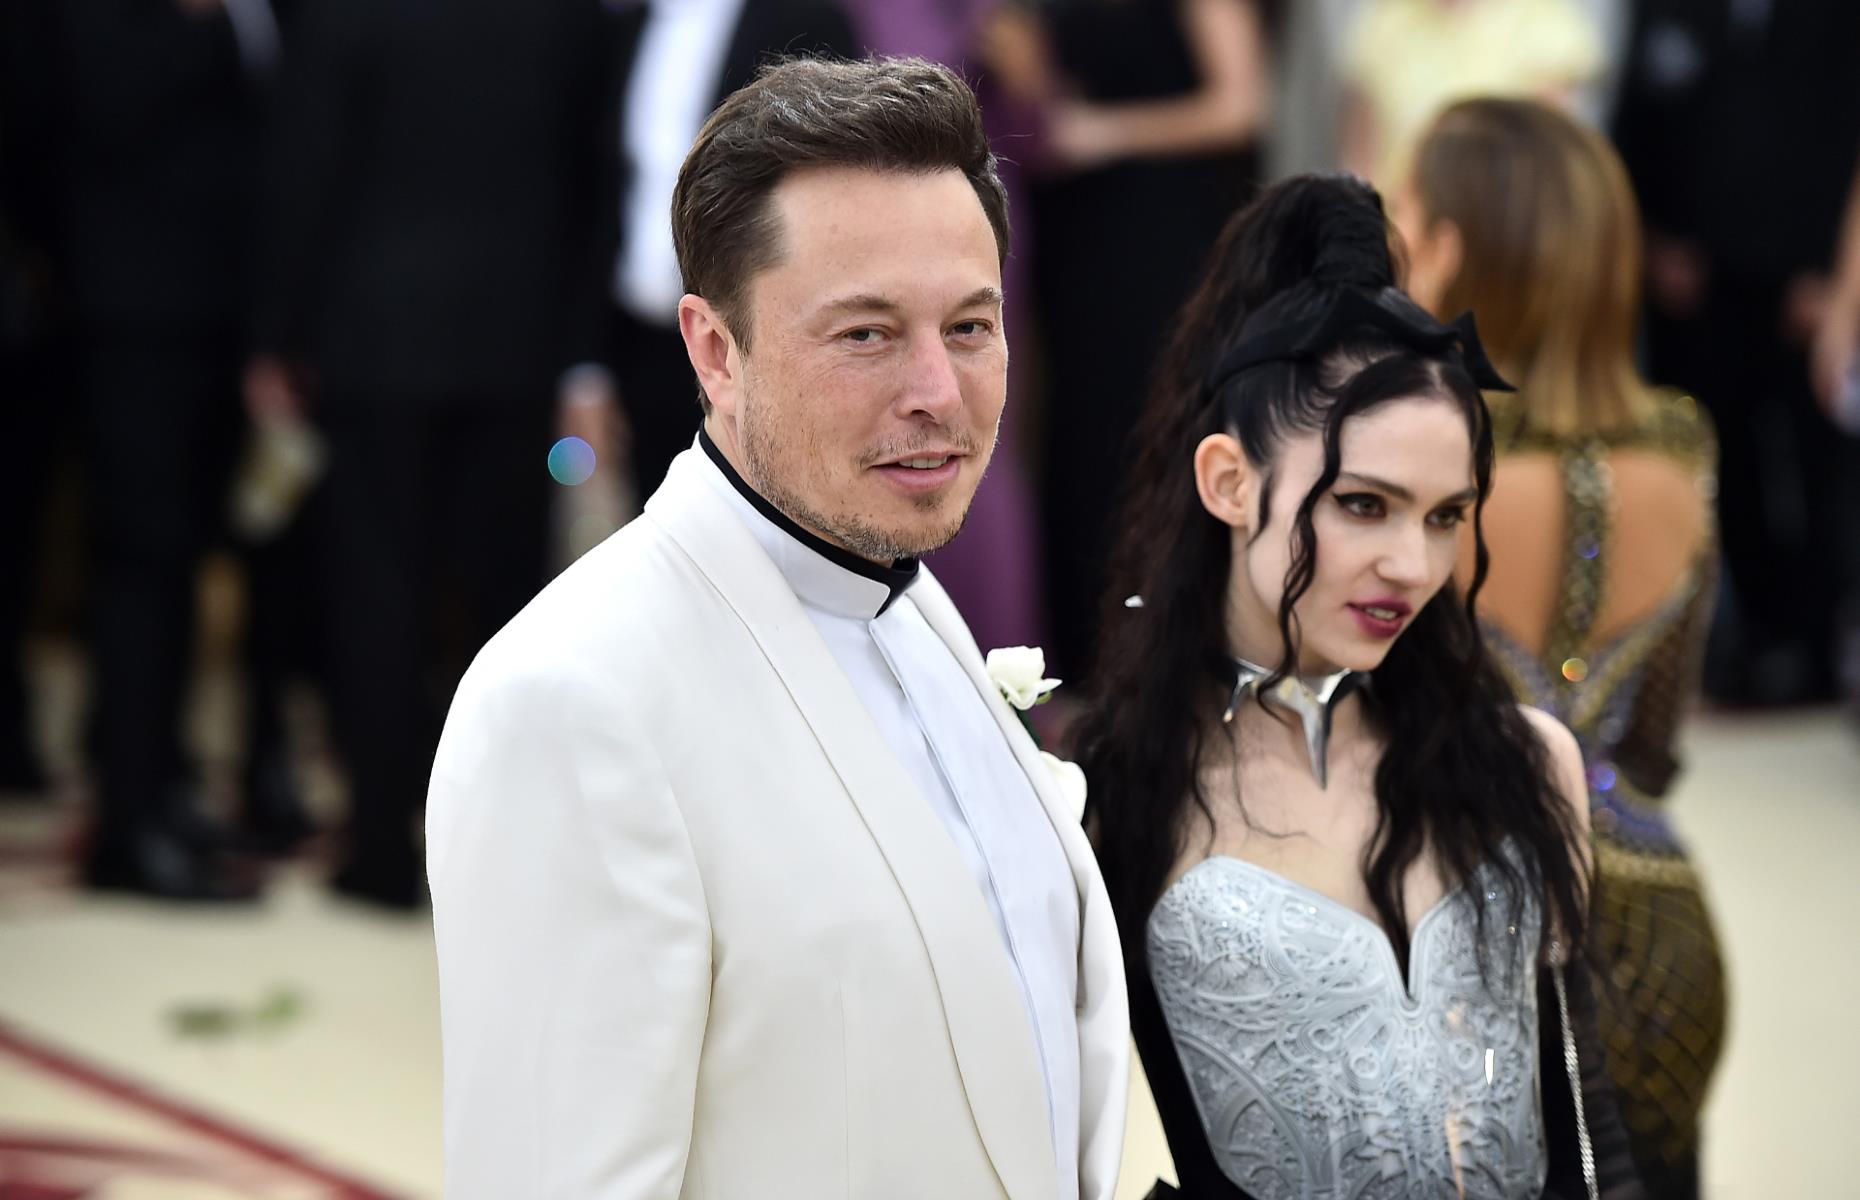 Fact: Elon Musk is the richest person in the world